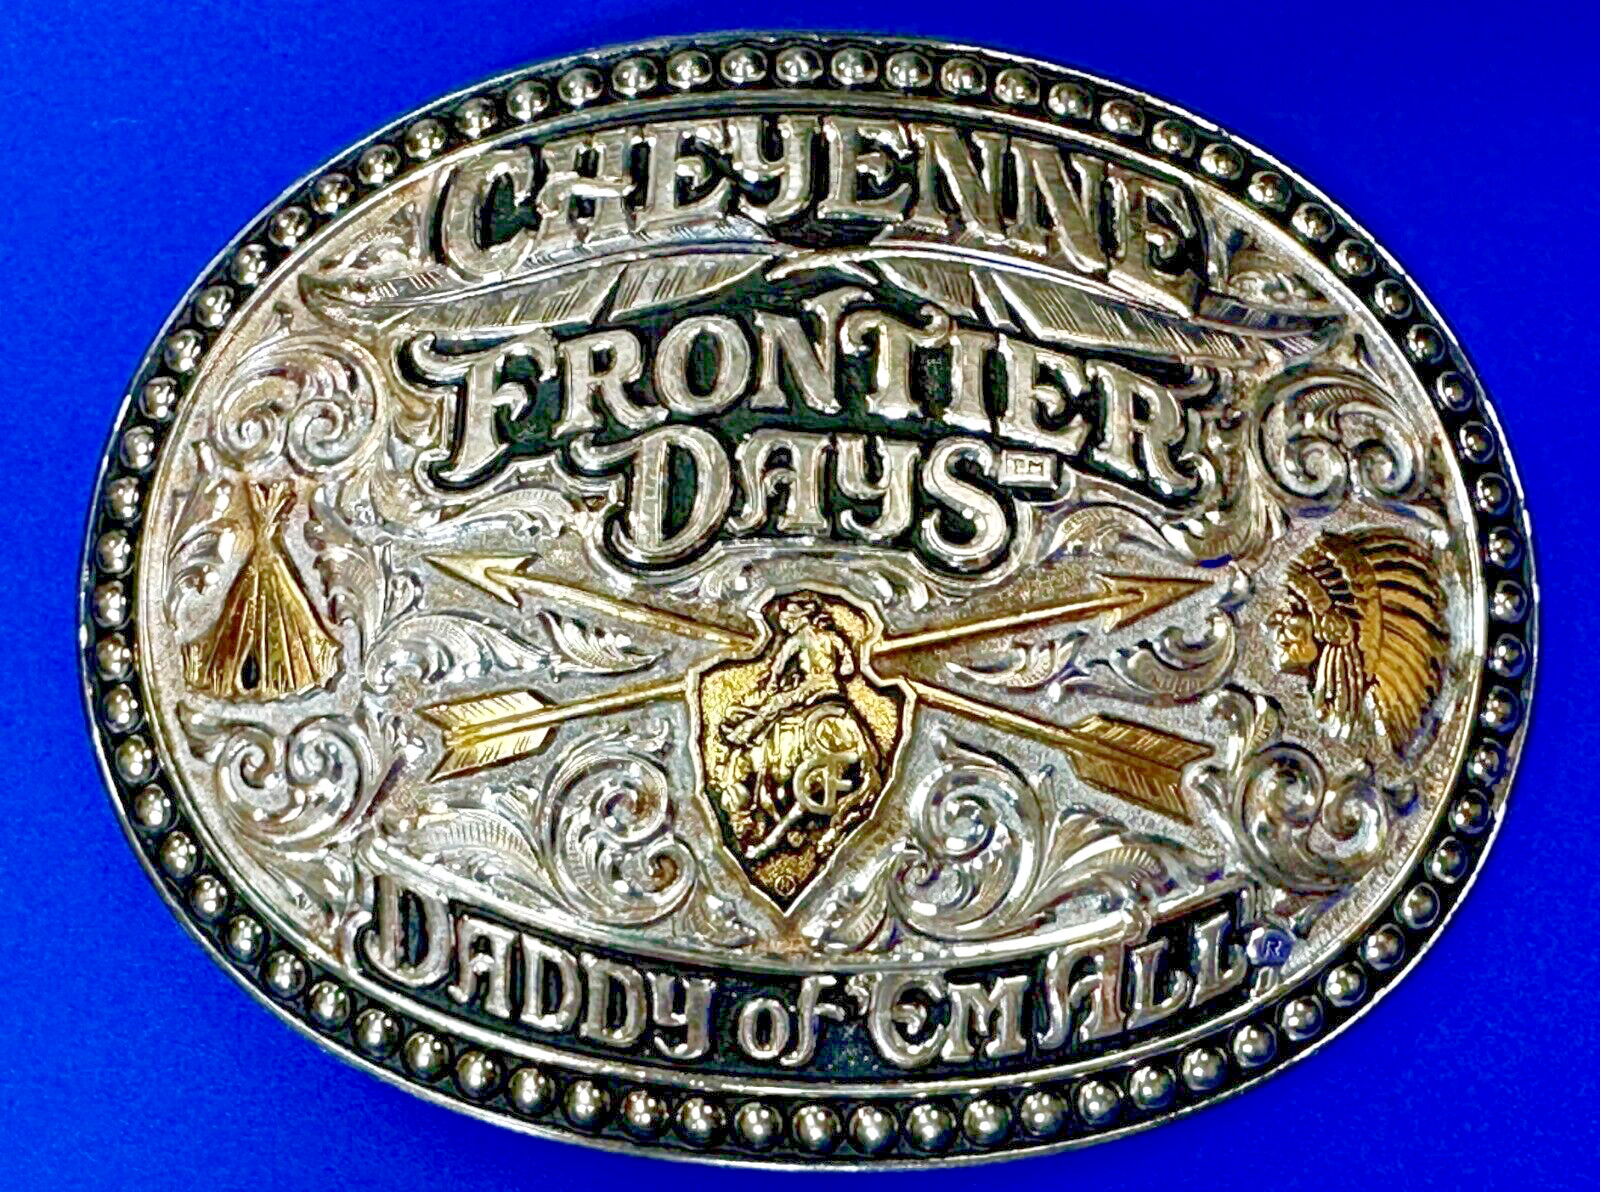 Cheyenne Frontier Days - Daddy Of Em All 5Th In Series Trophy Style Belt Buckle